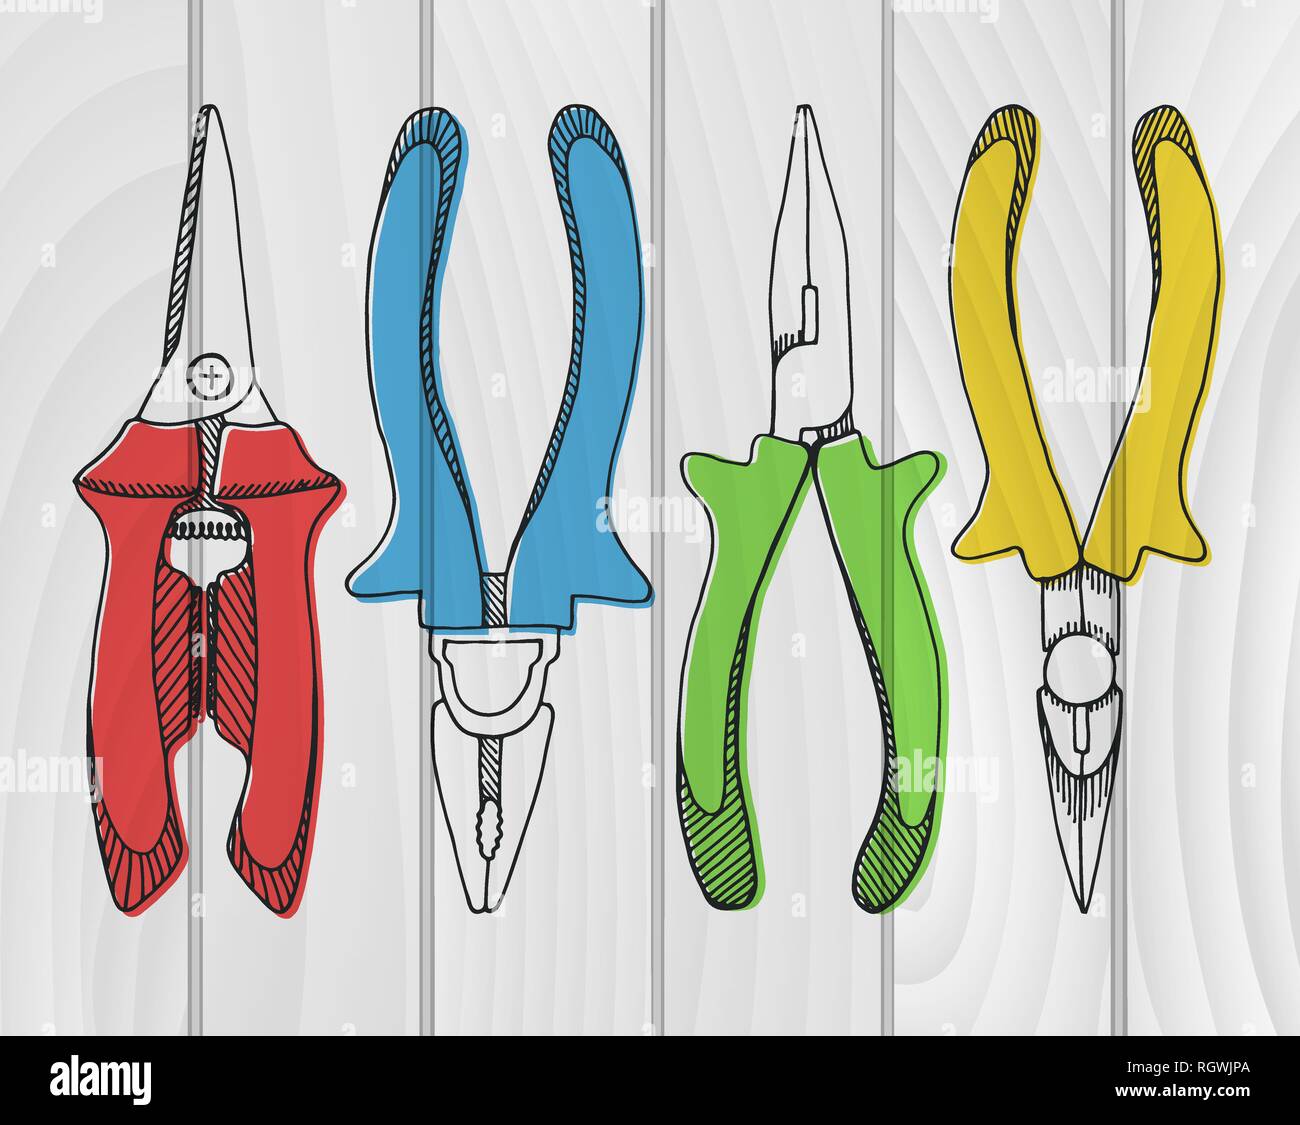 Set of pliers, pincers, and pruning scissors. Tools illustration in vector sketch style. Stock Vector